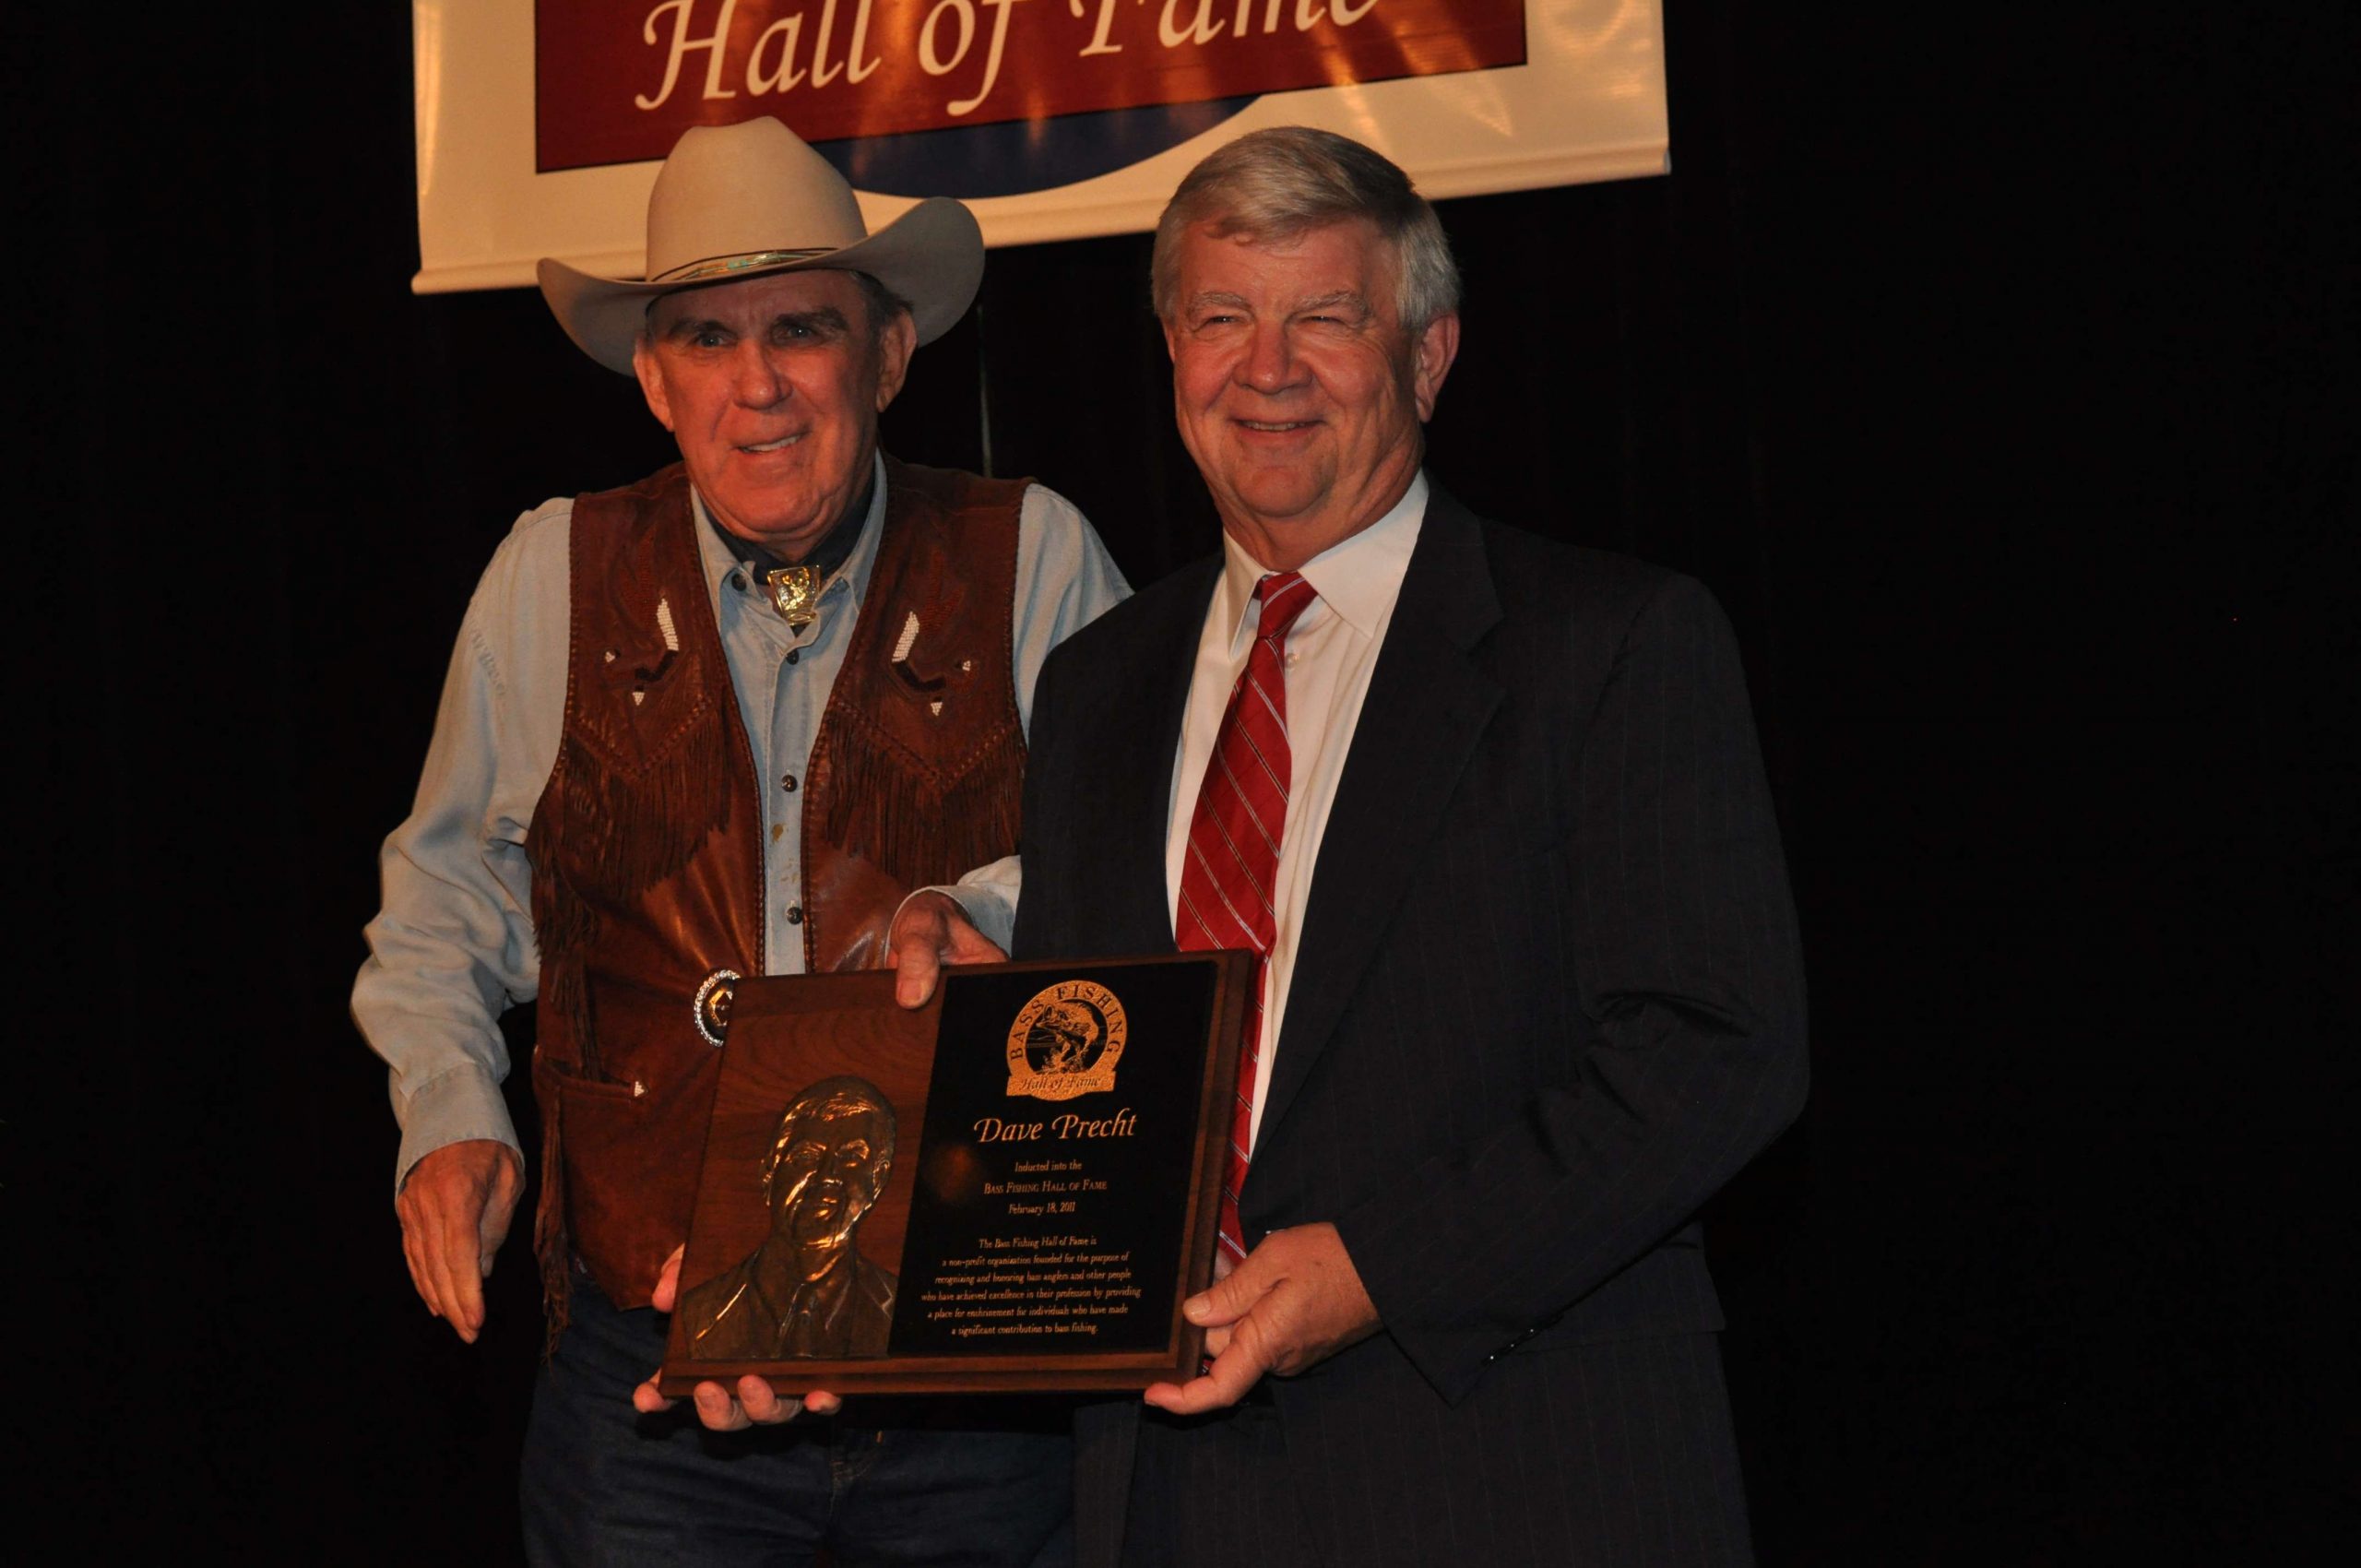 To recognize his incredible contribution to the sport of bass fishing, Precht was inducted into the Bass Fishing Hall of Fame. Ray Scott introduced him.